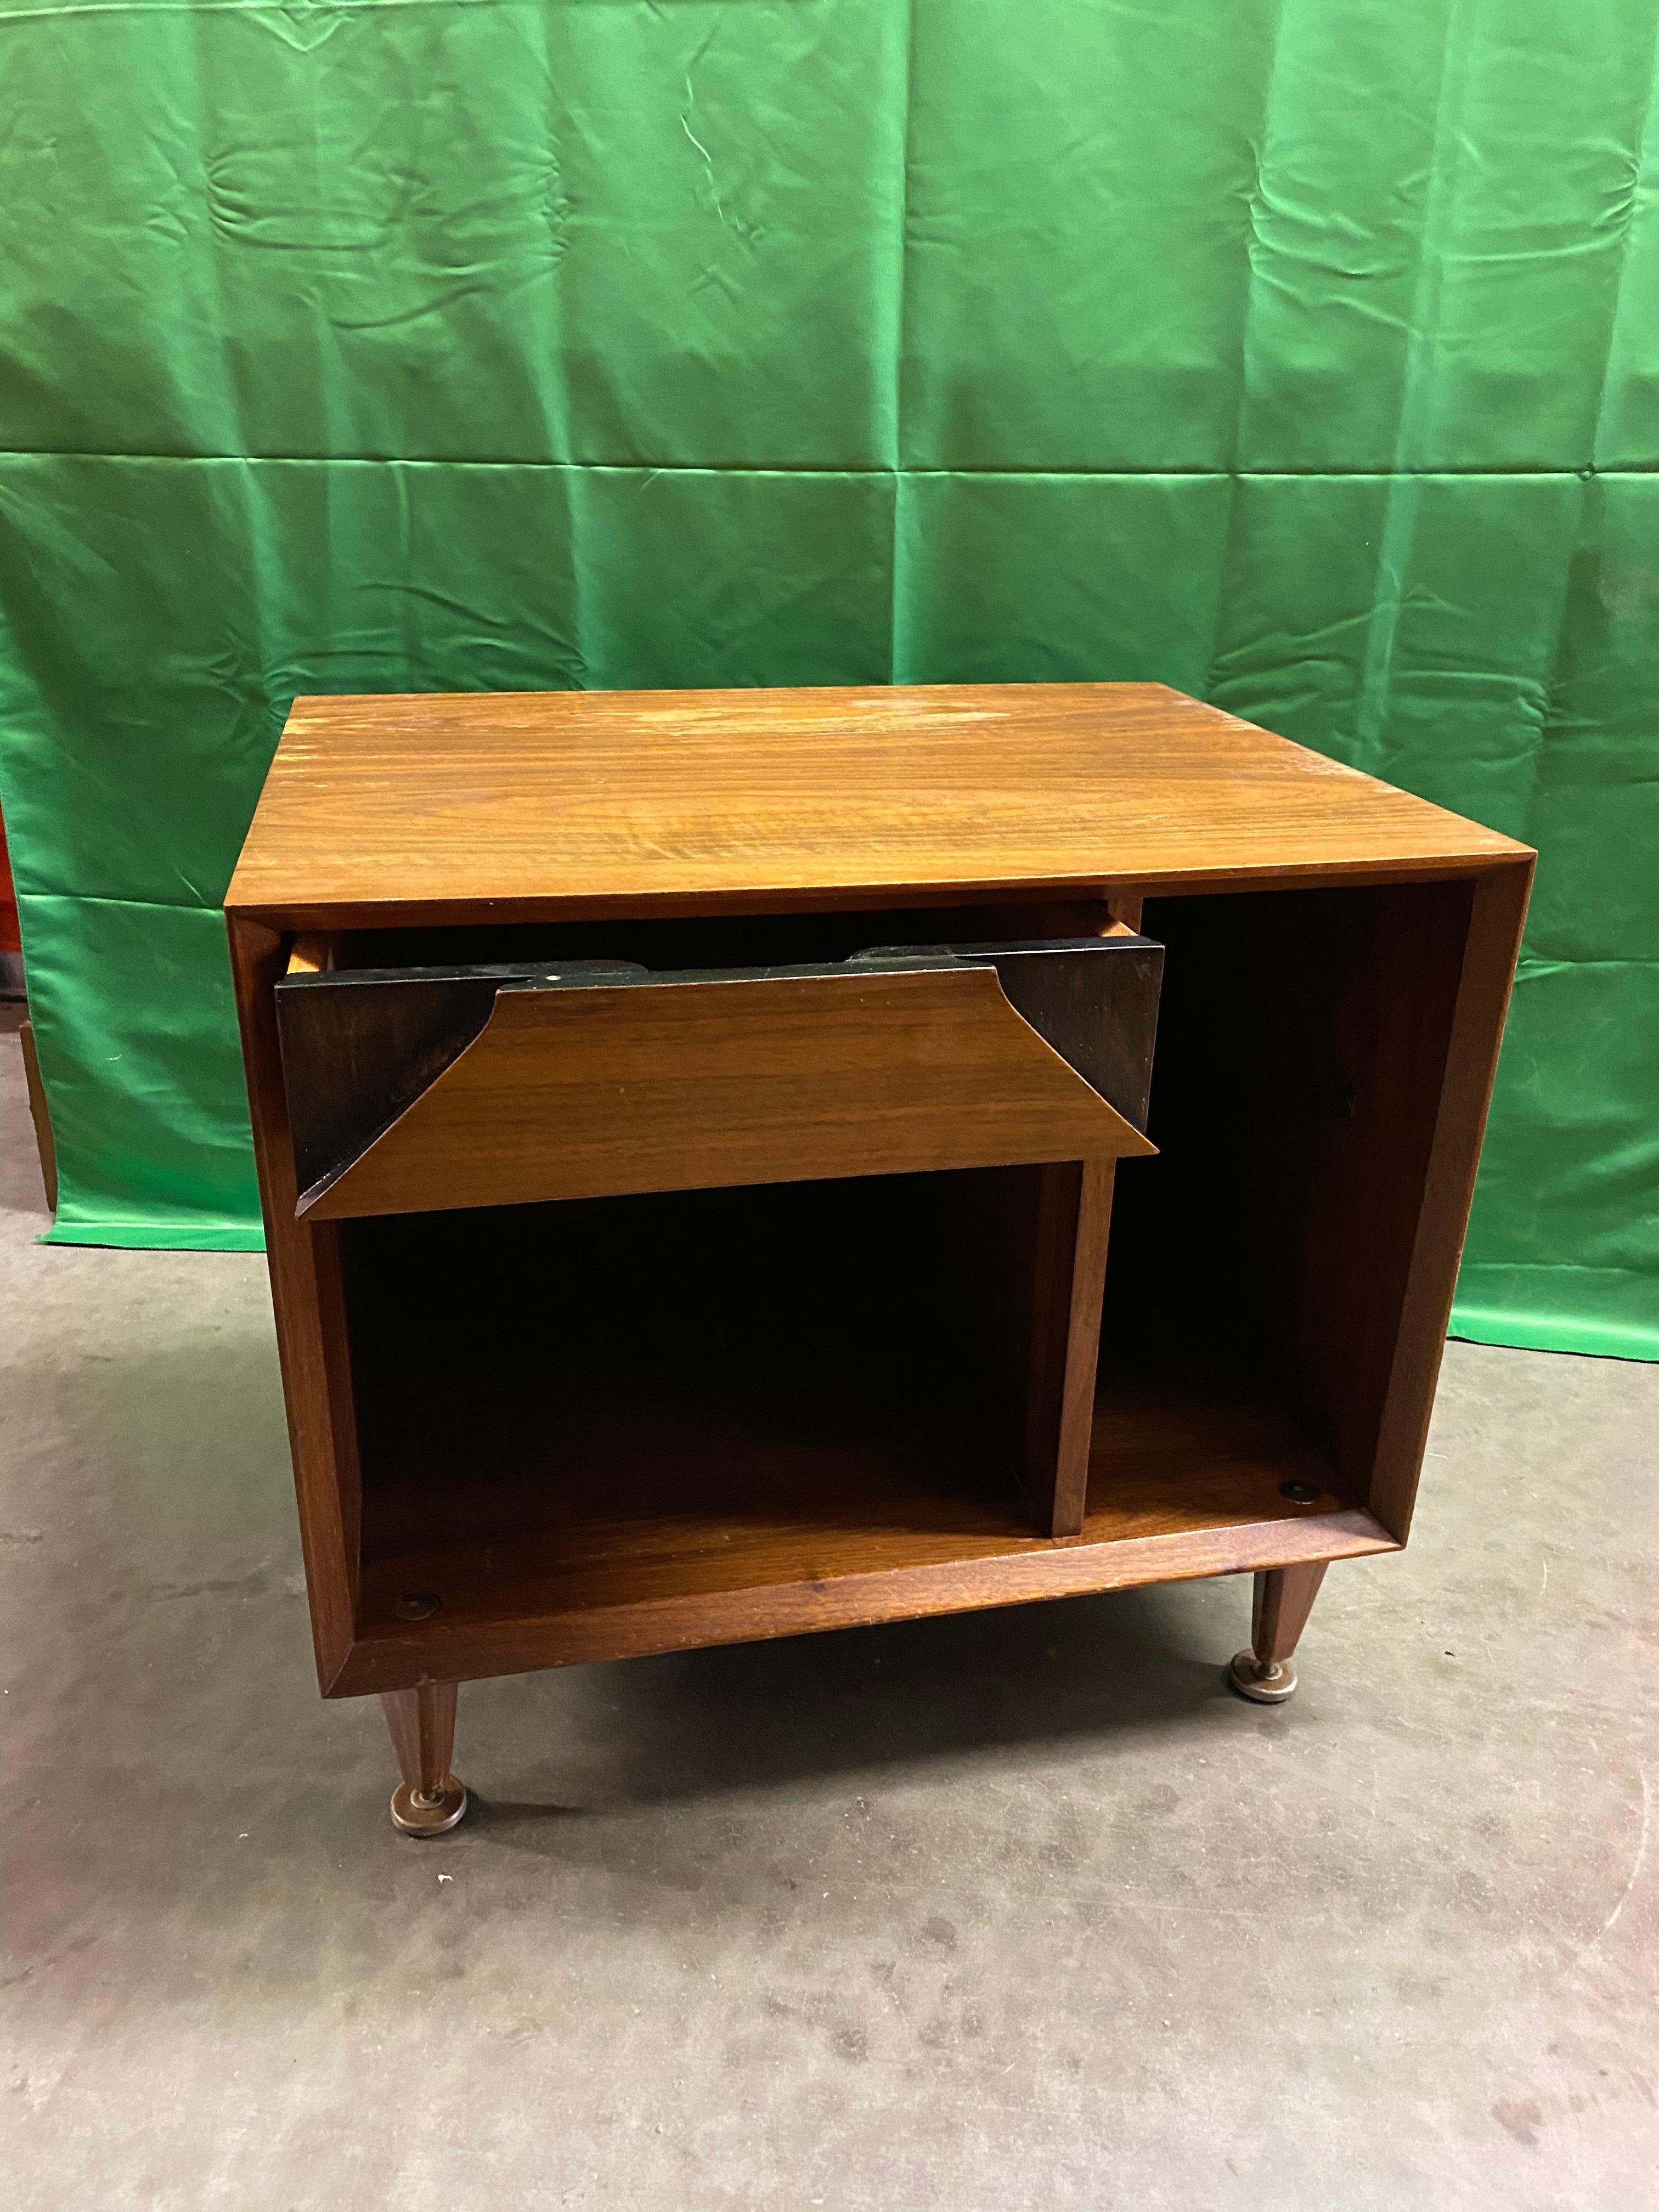 Pair of Mid-Century Modern Walnut Nightstands by Marc Berge for Grosfeld House In Good Condition For Sale In Downingtown, PA